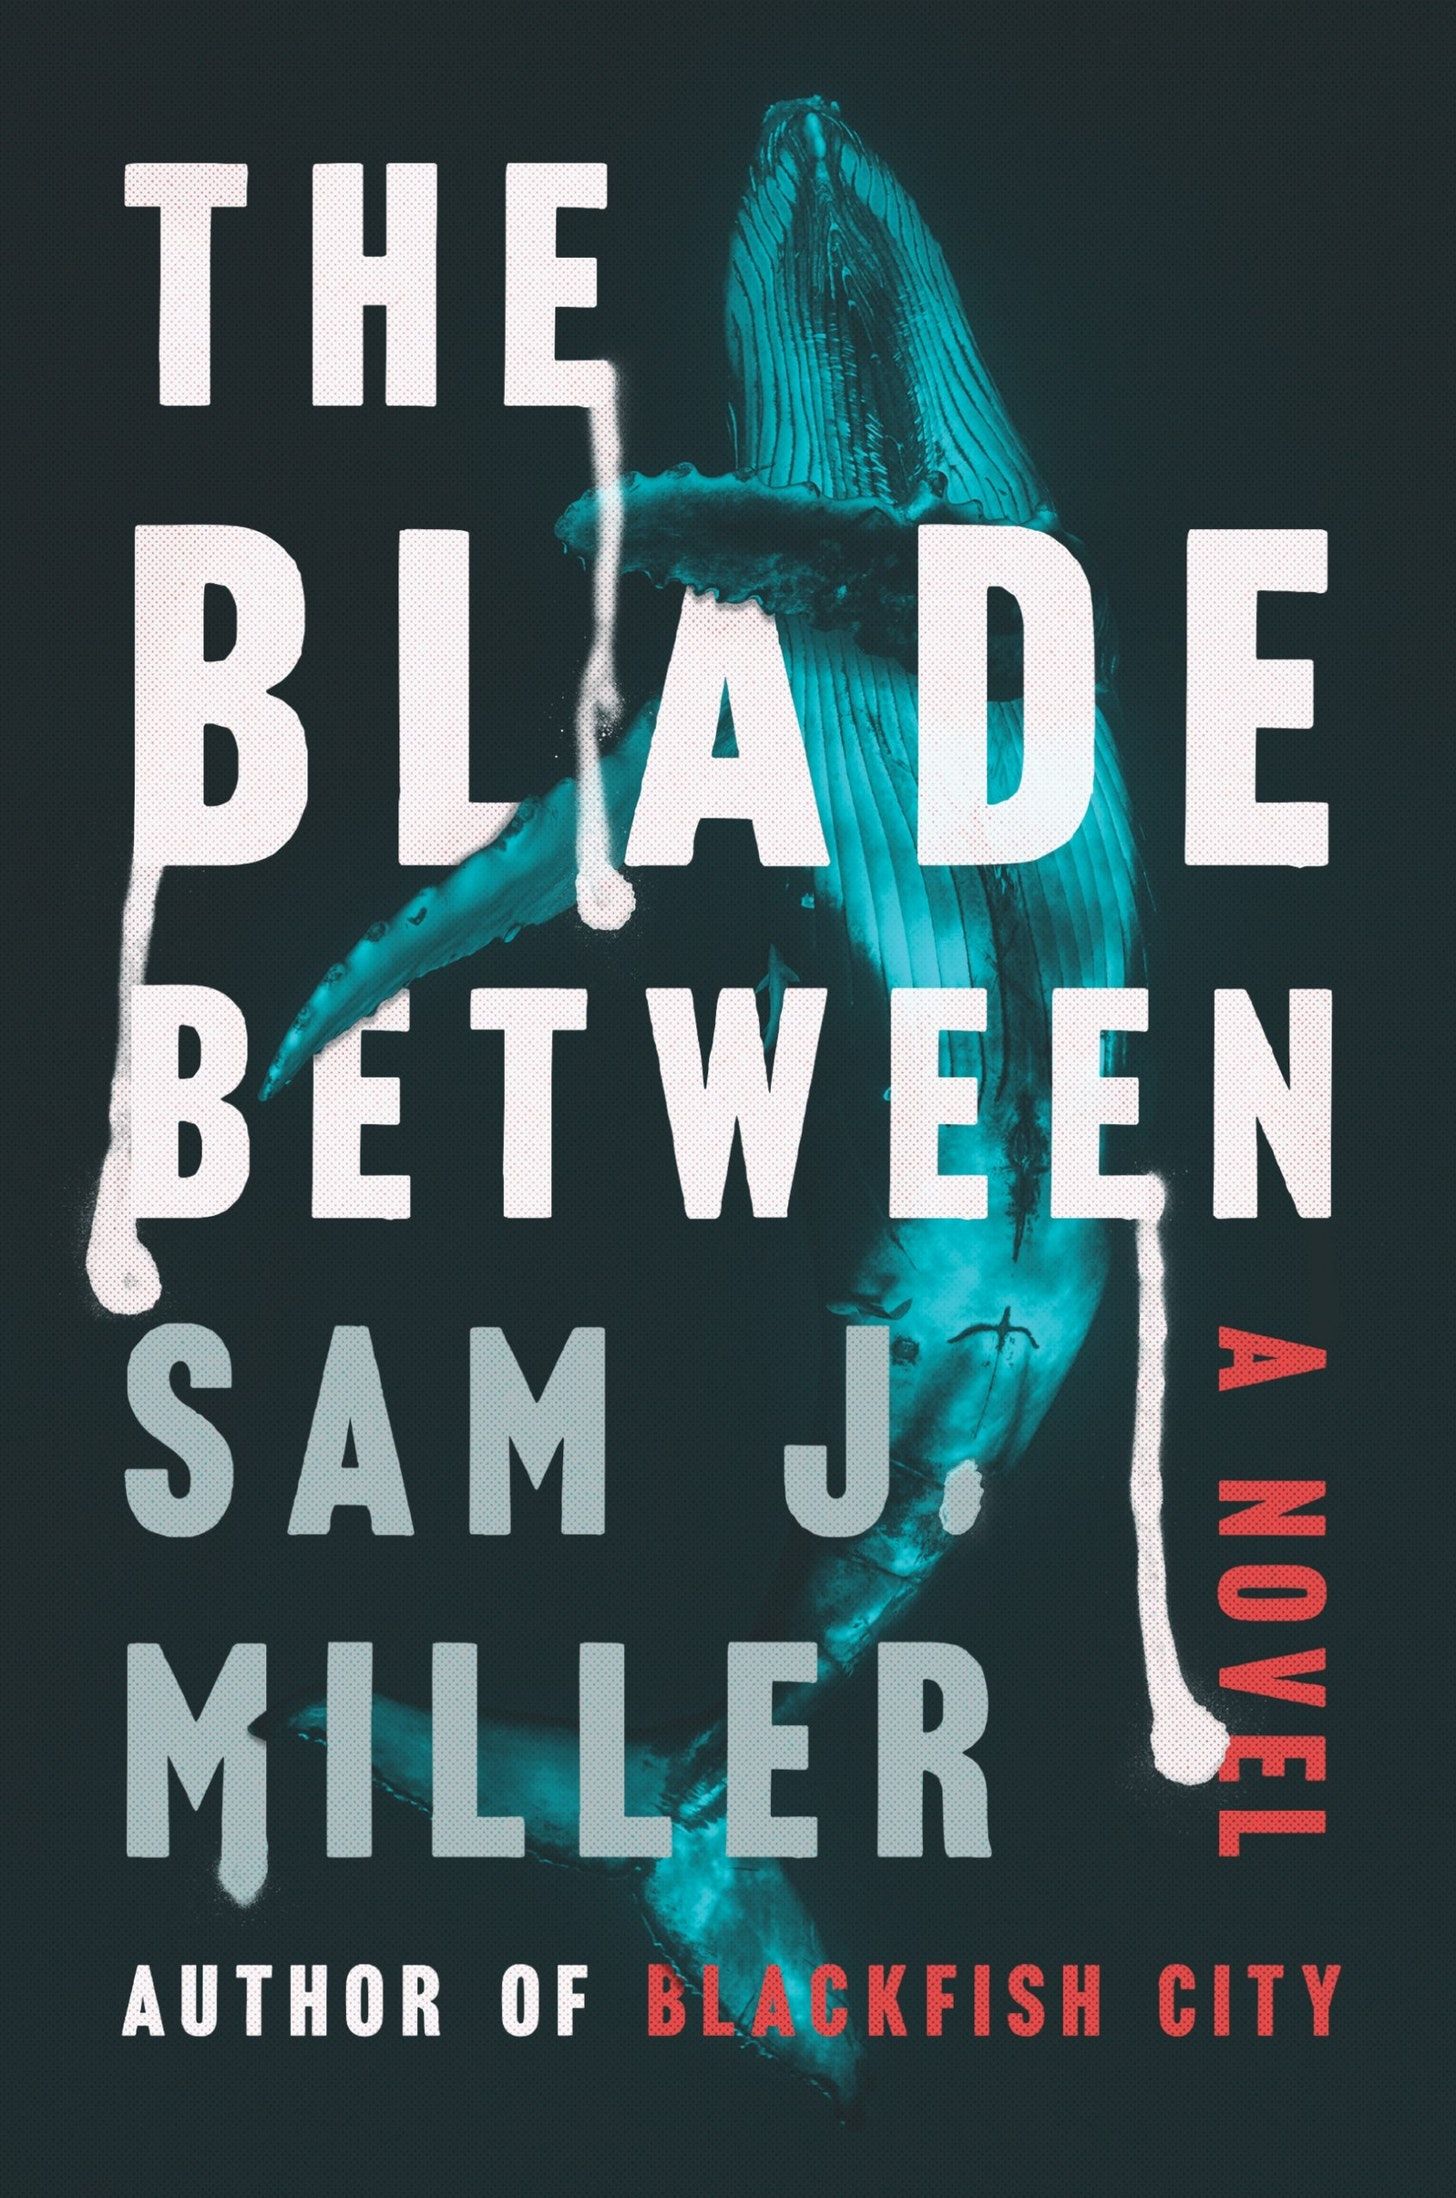 Cover image for The Blade Between, showing the title in white against a teal whale on a black background.